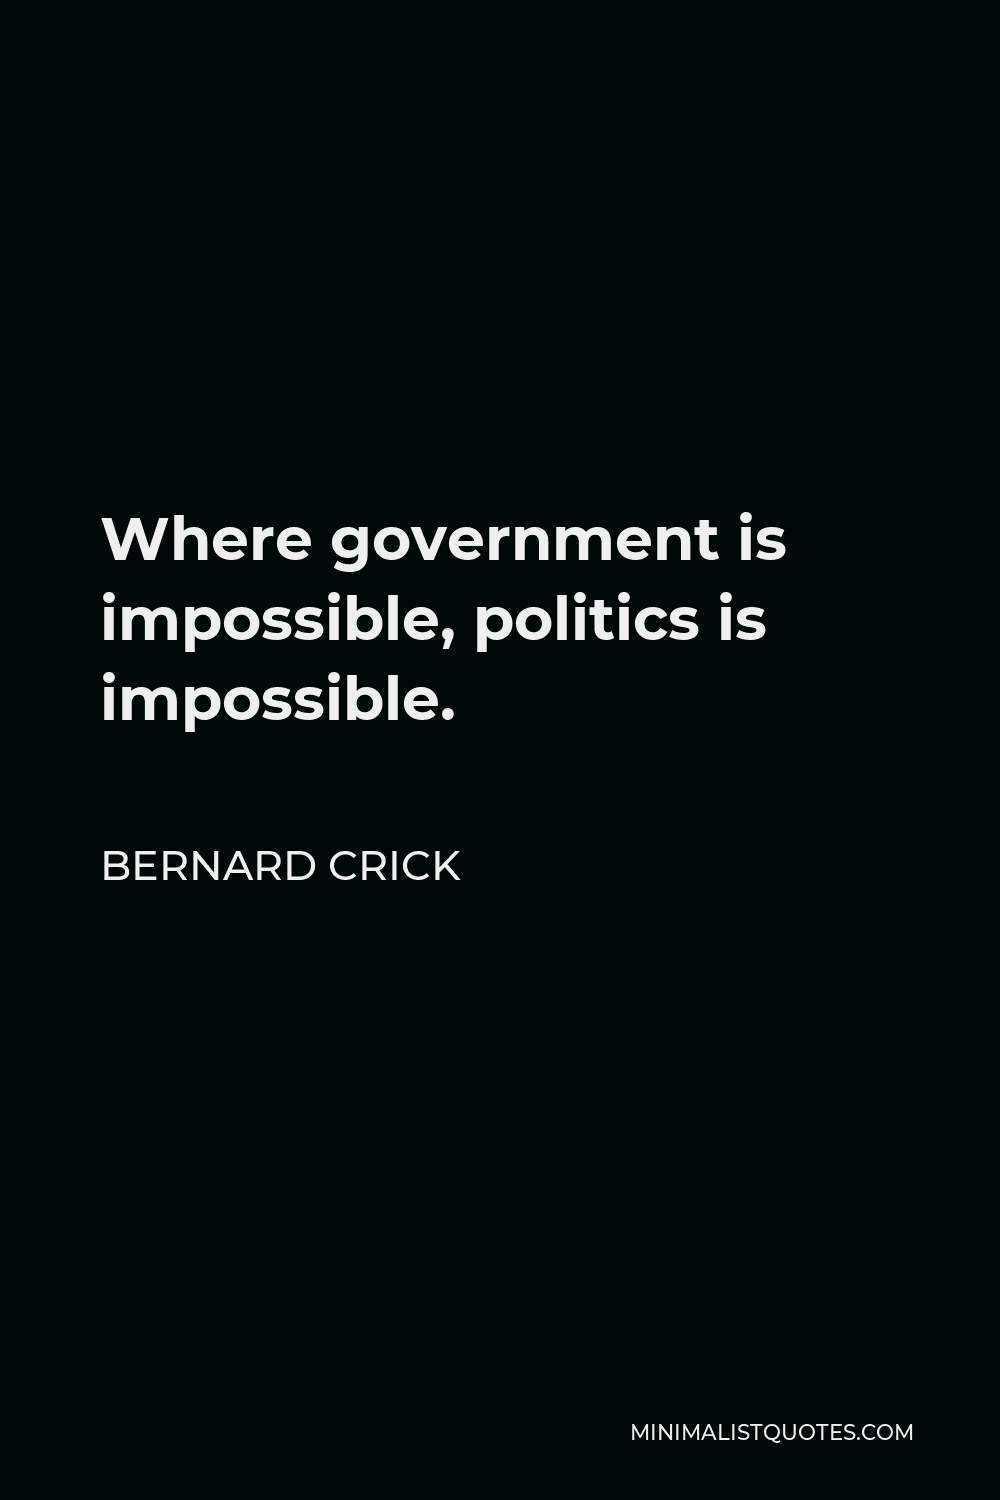 Bernard Crick Quote - Where government is impossible, politics is impossible.